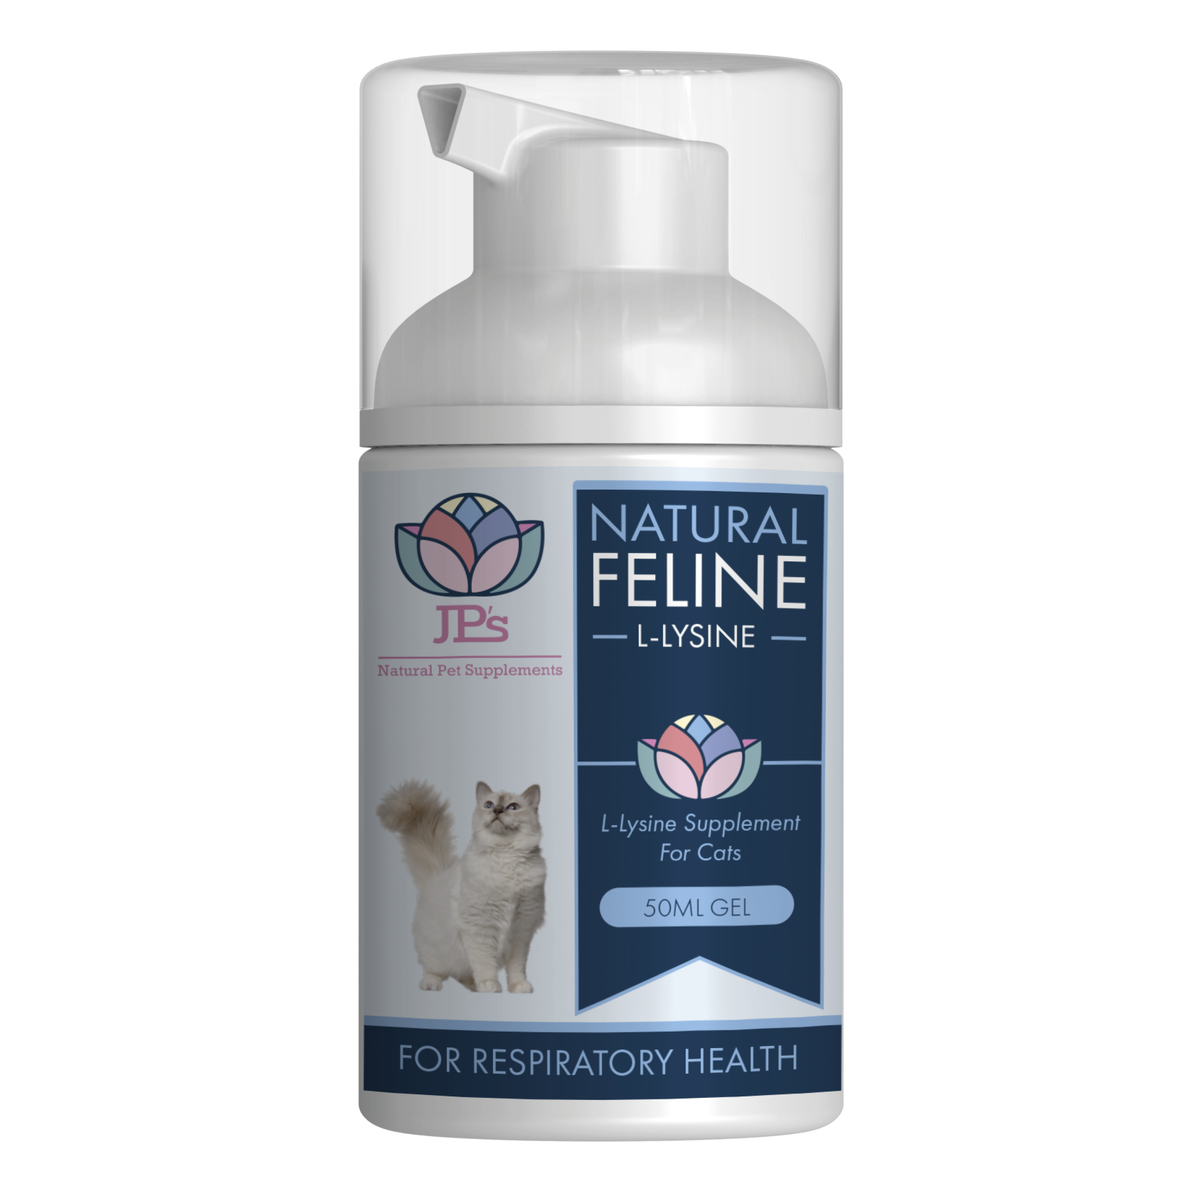 Natural L-lysine supplement for cats